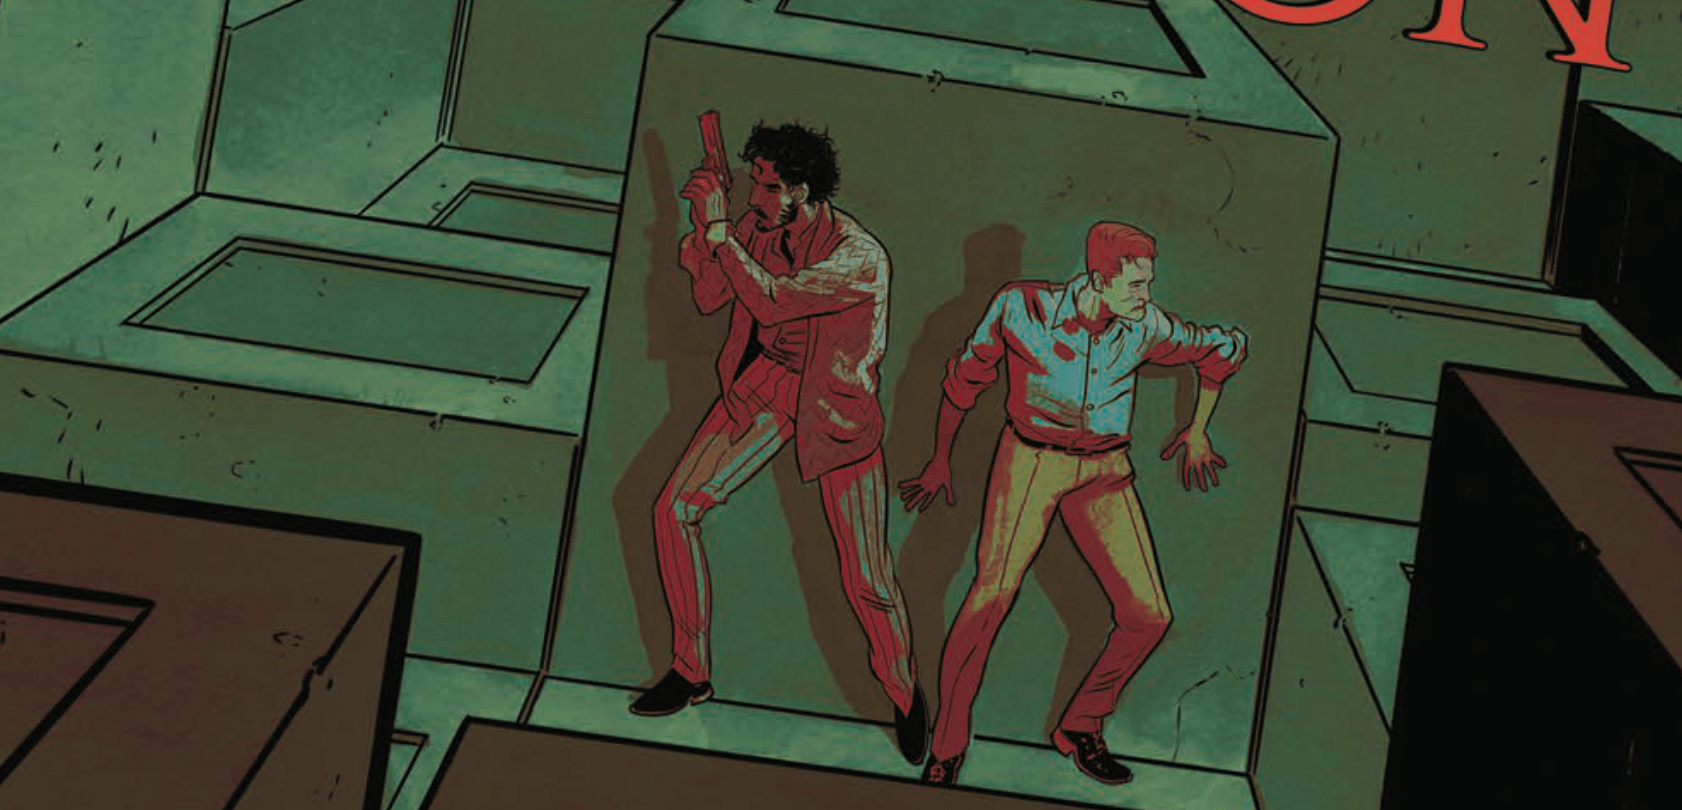 'Dark Spaces: Dungeon' #4 is deliciously tense